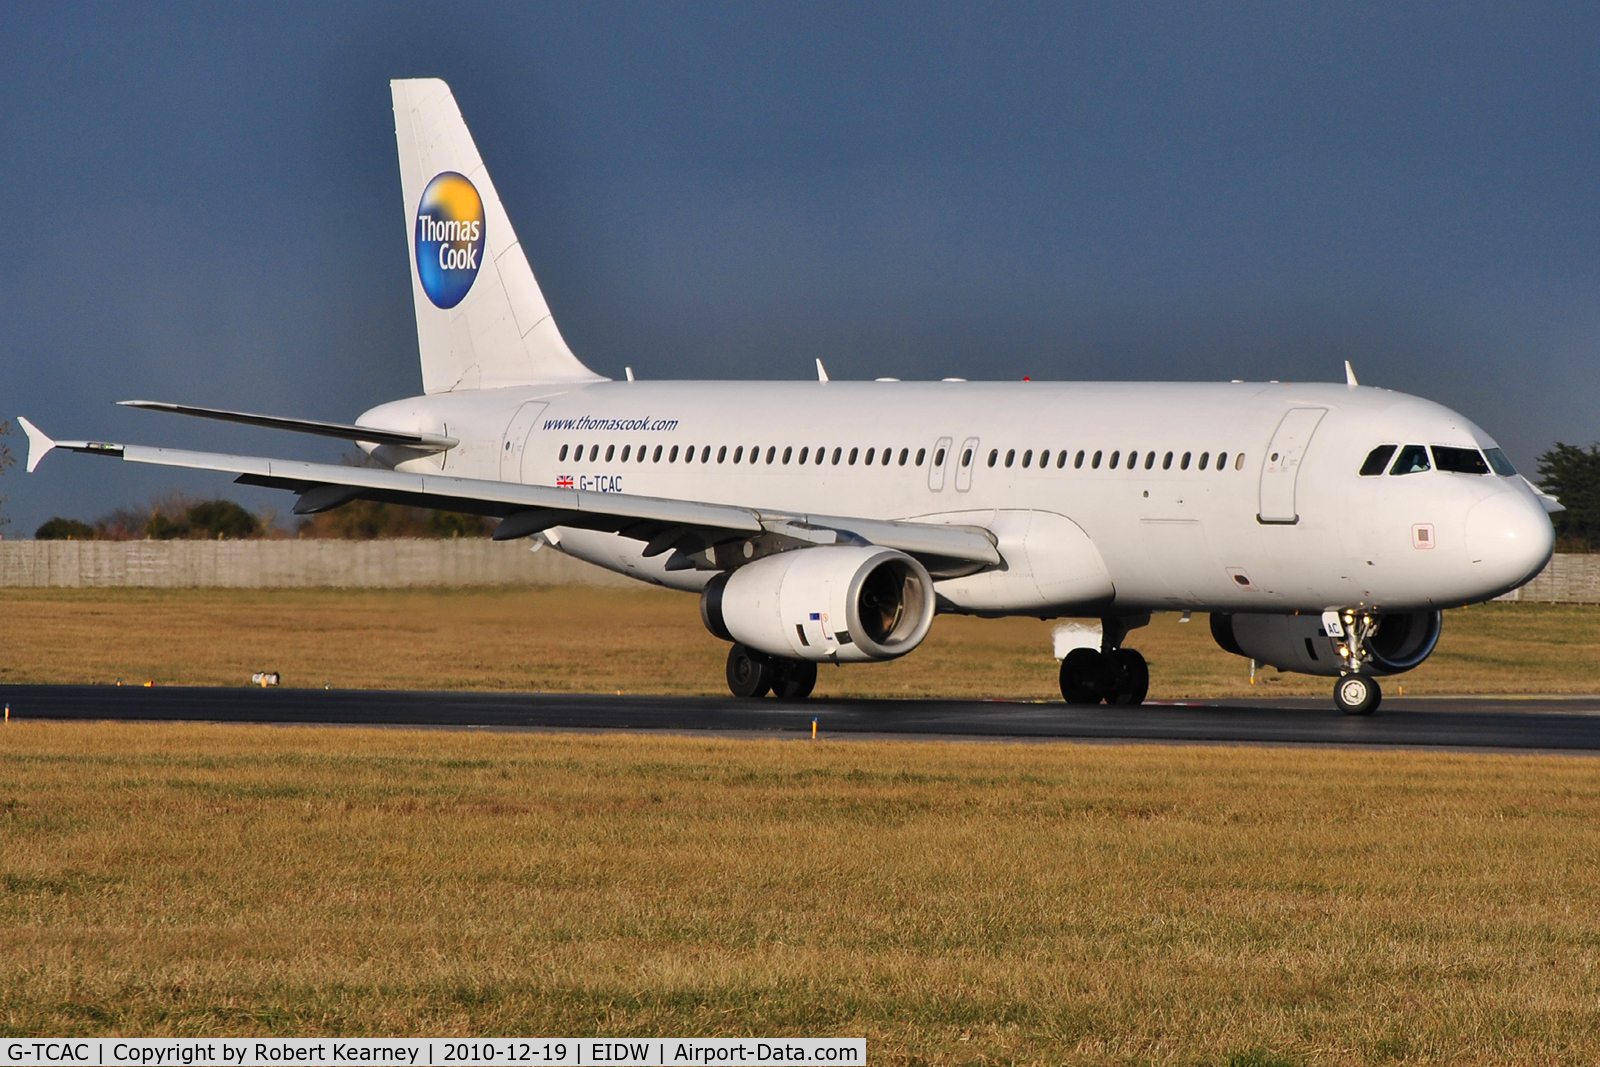 G-TCAC, 2001 Airbus A320-232 C/N 1411, Thomas Cook lining up r/w 10